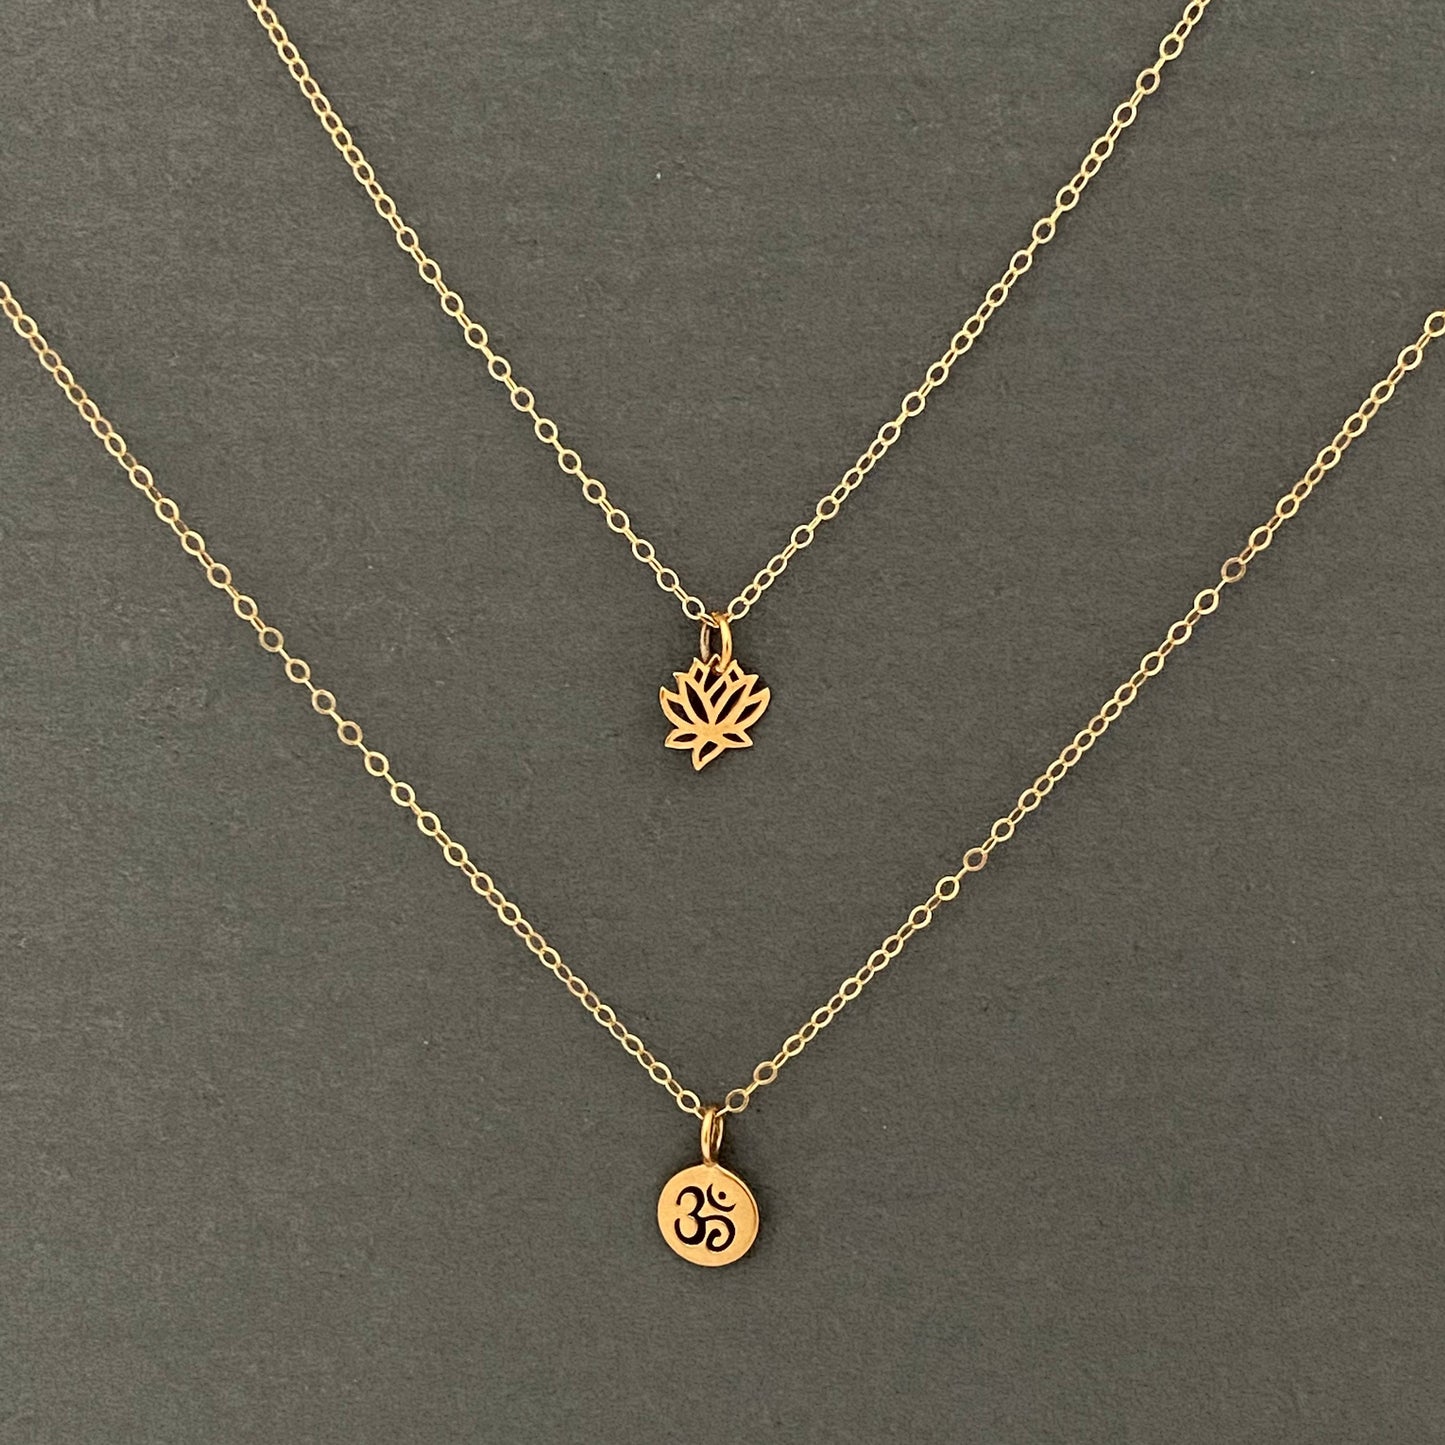 Om and Lotus flower layered necklaces